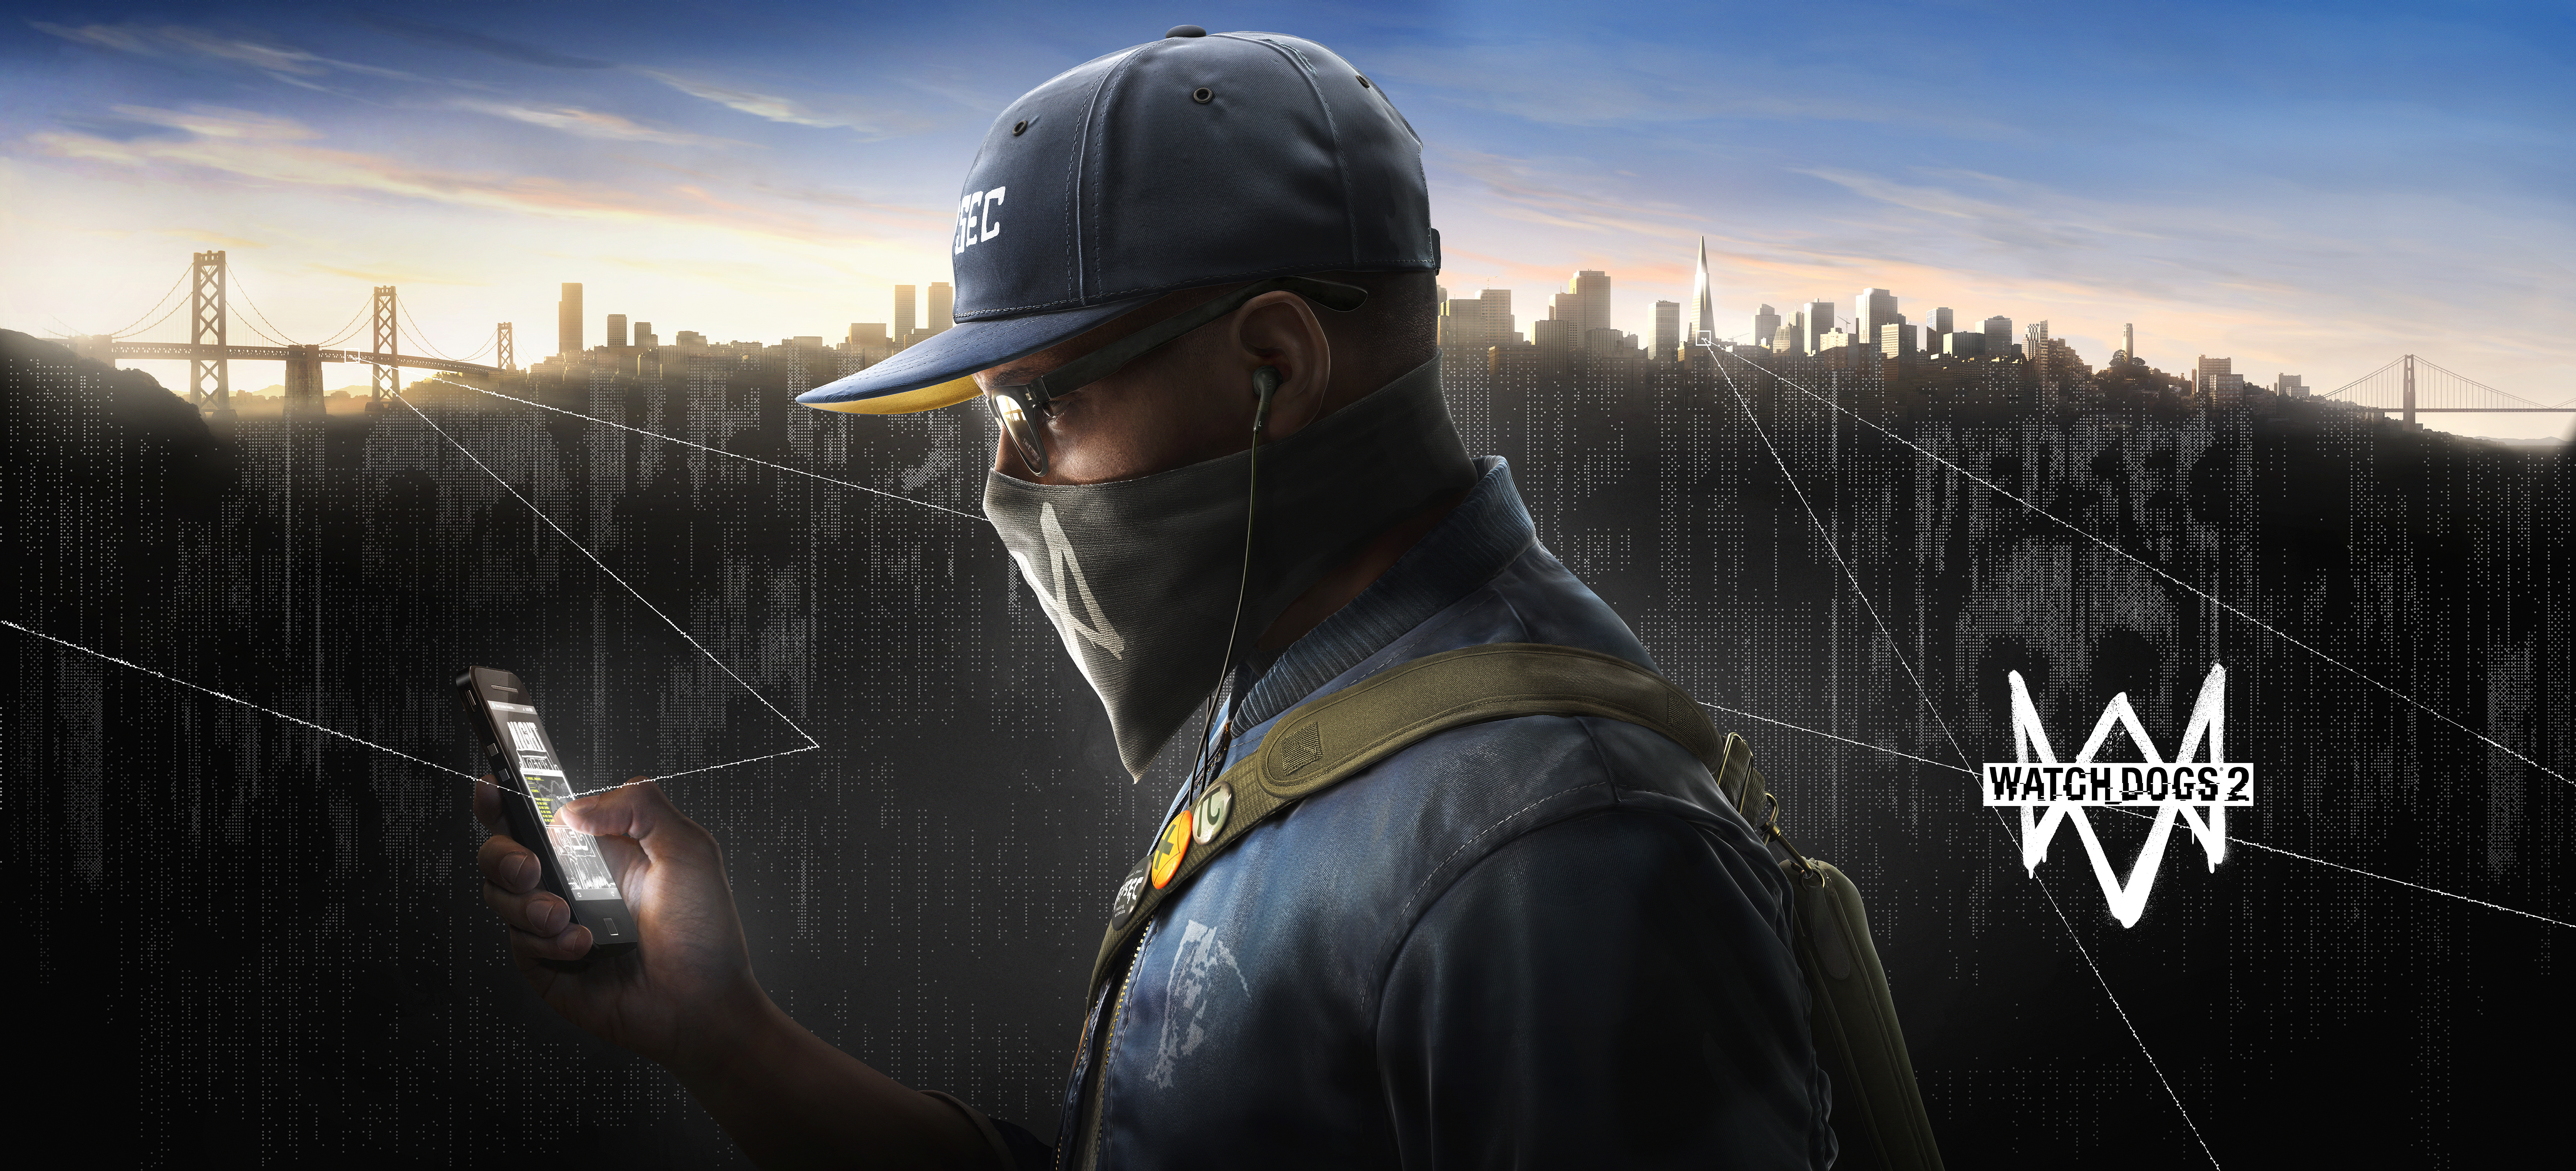 75+ Watch Dogs 2 Hd Wallpapers For Phone